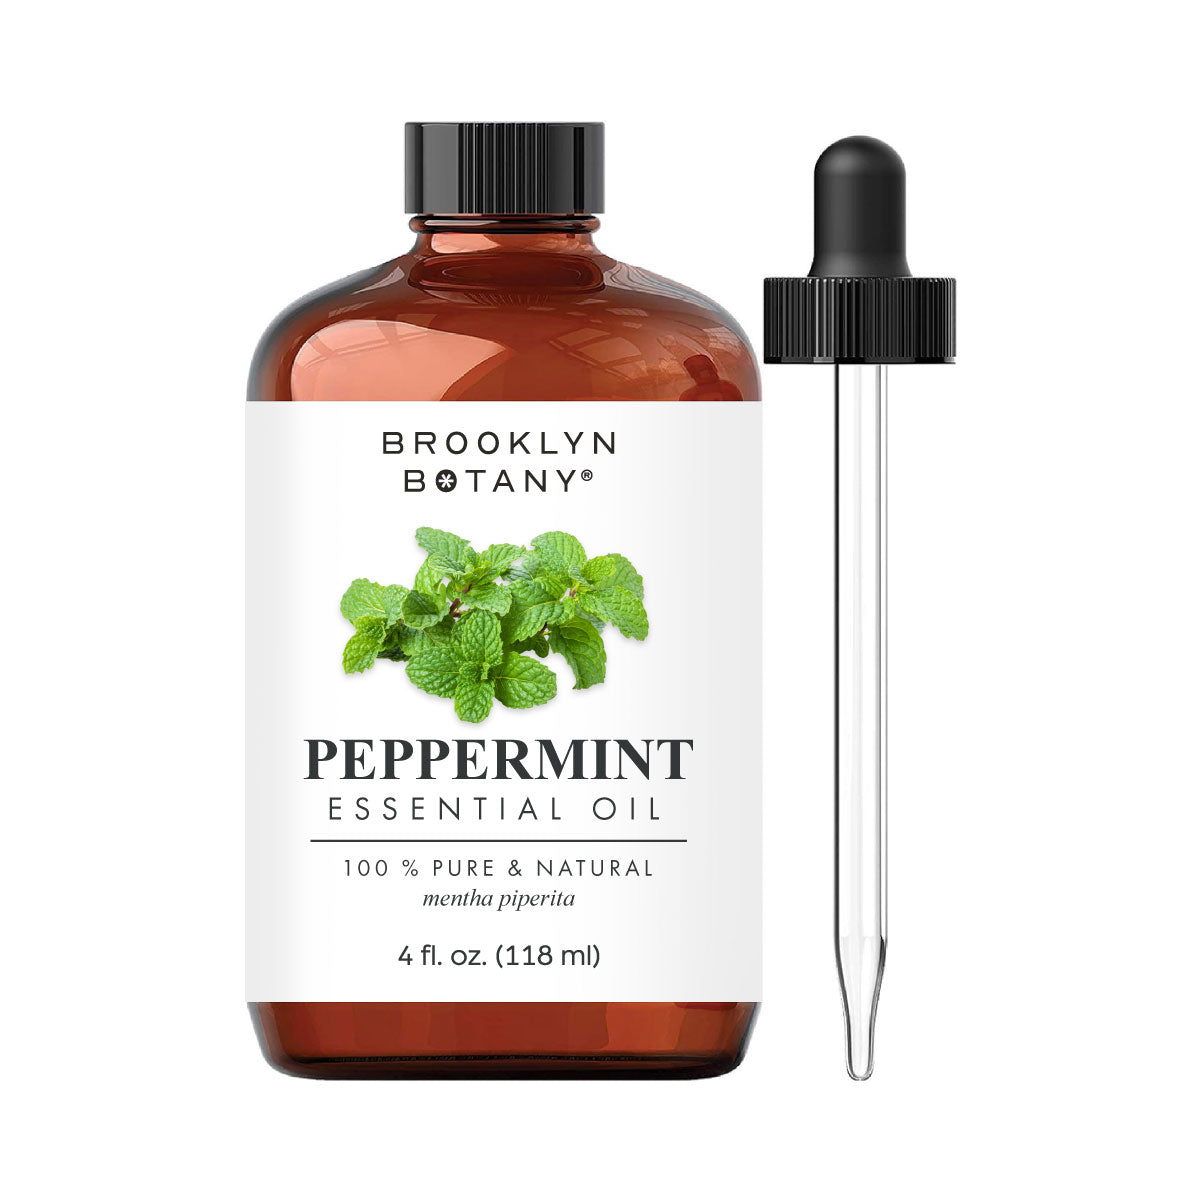 SHOPIFY_-BB-Peppermint-Essential-Oil-Main-Image-1.jpg